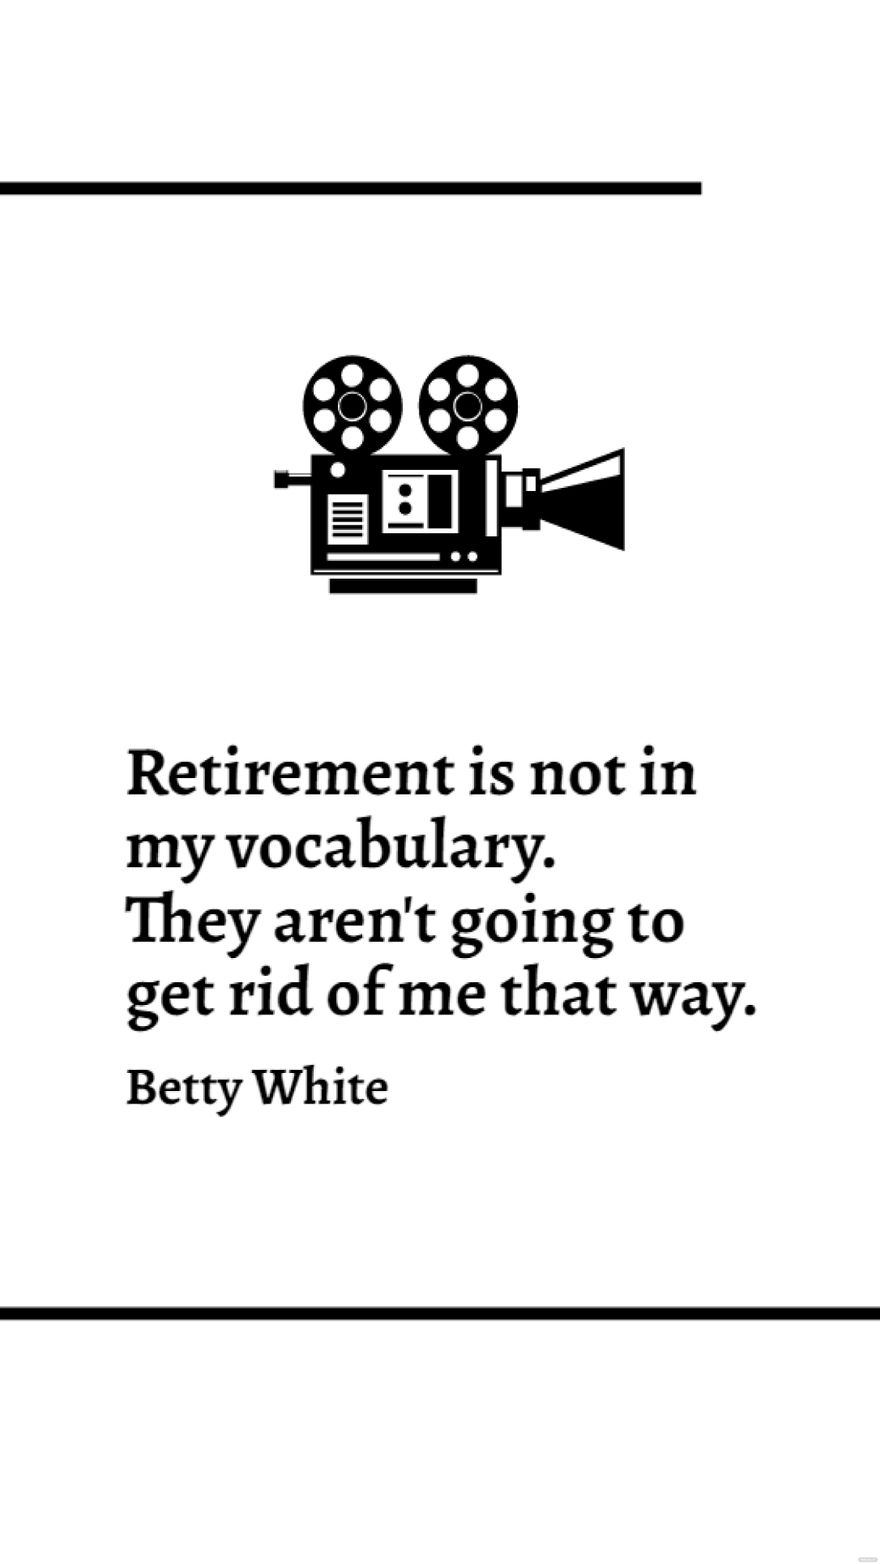 Free Betty White - Retirement is not in my vocabulary. They aren't going to get rid of me that way.